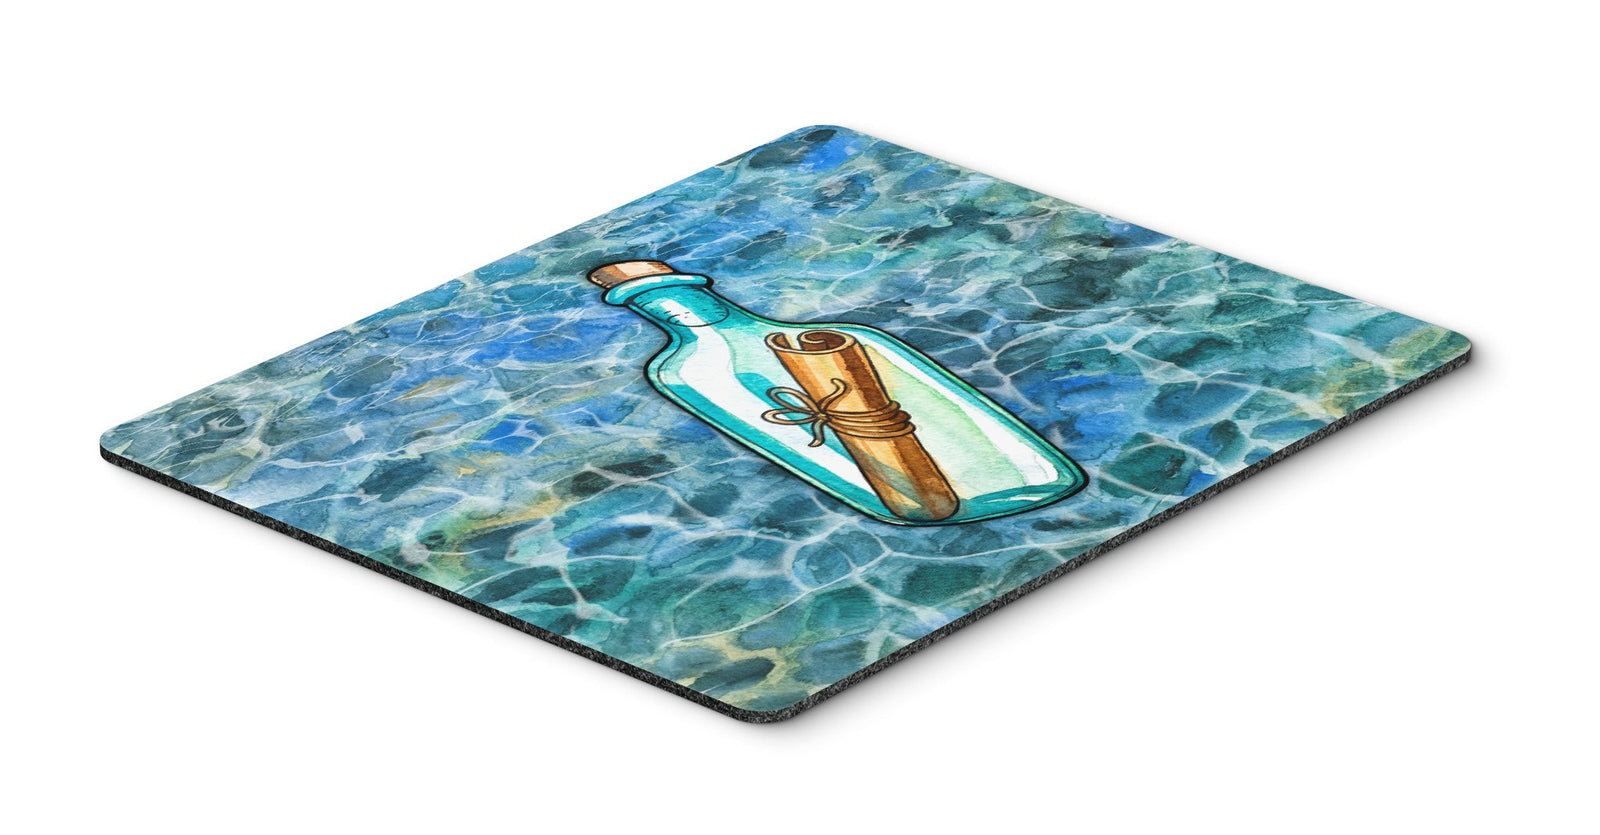 Messag in a Bottle Mouse Pad, Hot Pad or Trivet BB5343MP by Caroline's Treasures